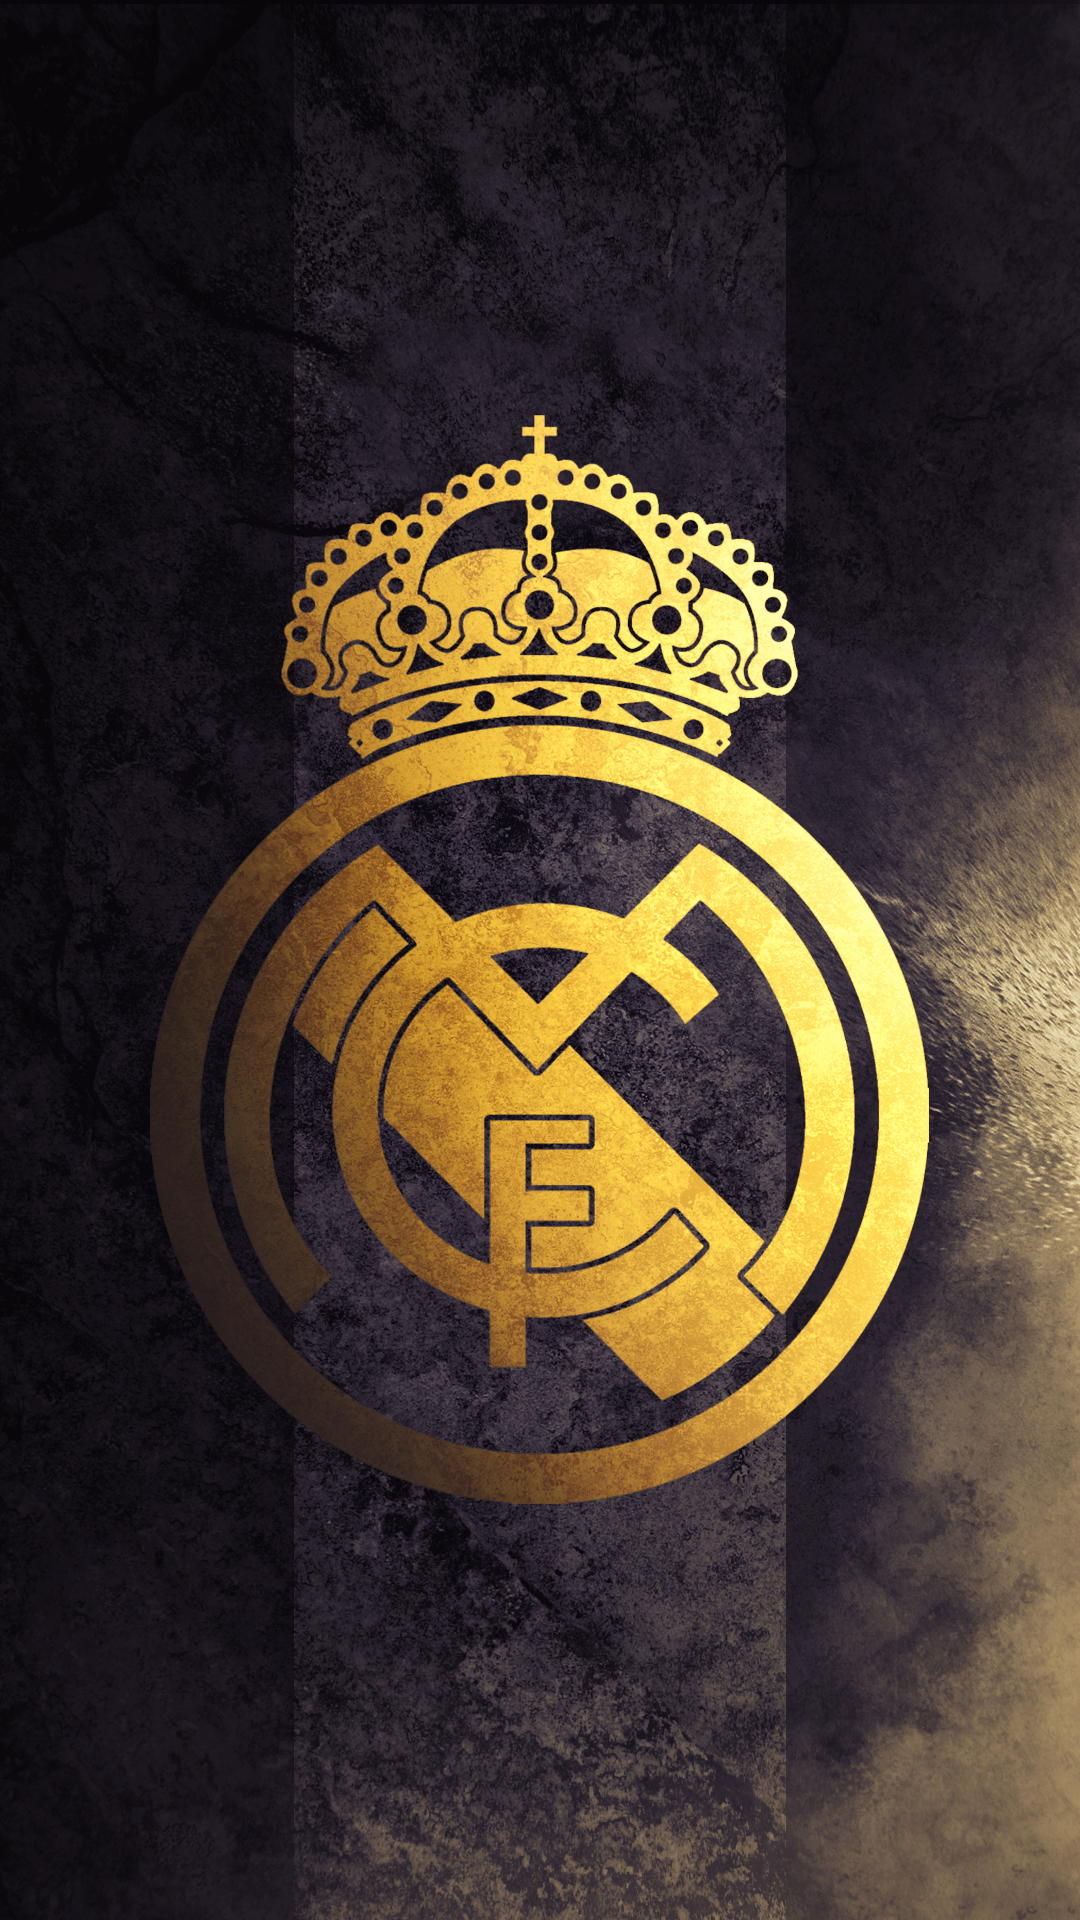 Real Madrid IPhone Wallpaper 57 images